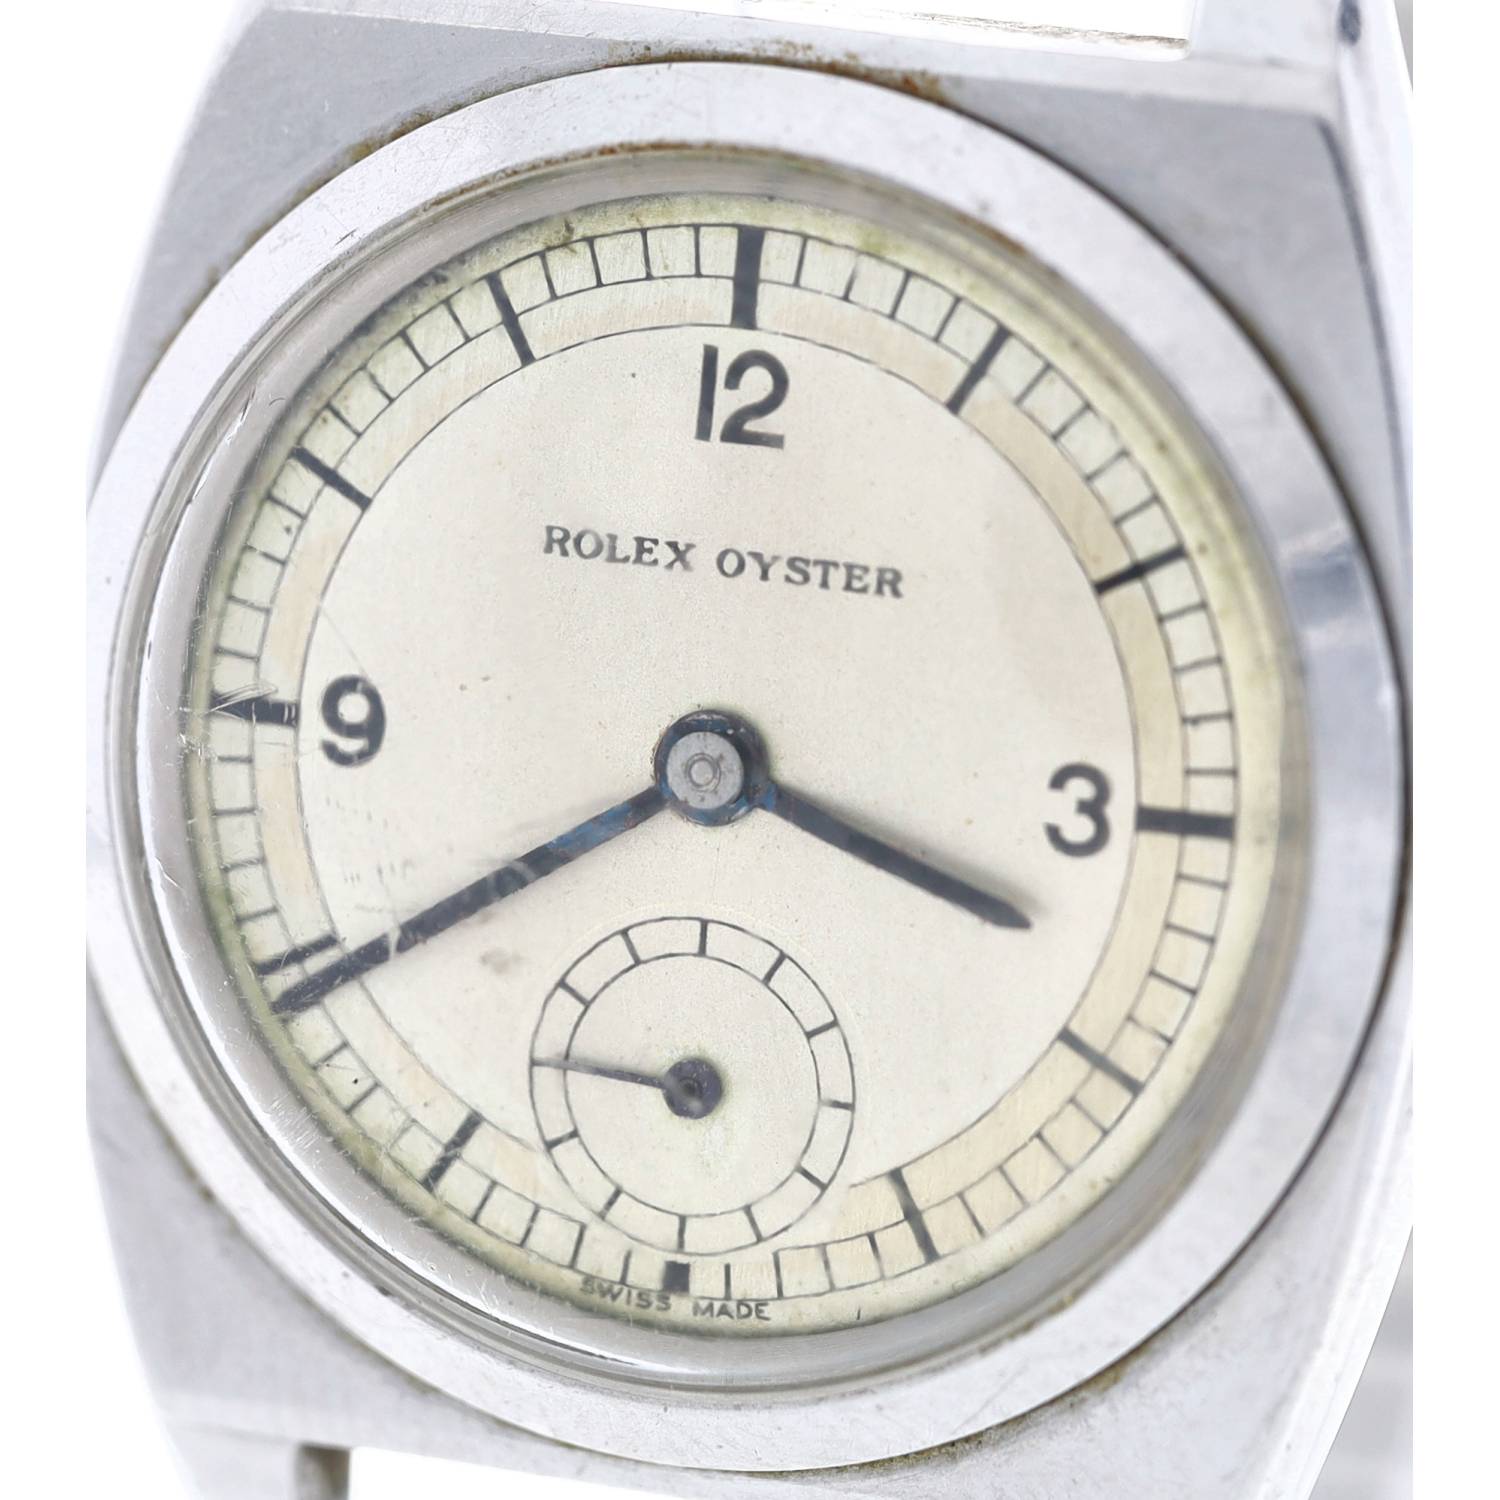 Rolex Oyster mid-size stainless steel gentleman's wristwatch, reference no. 2574, case no. 2343xx, - Image 4 of 6